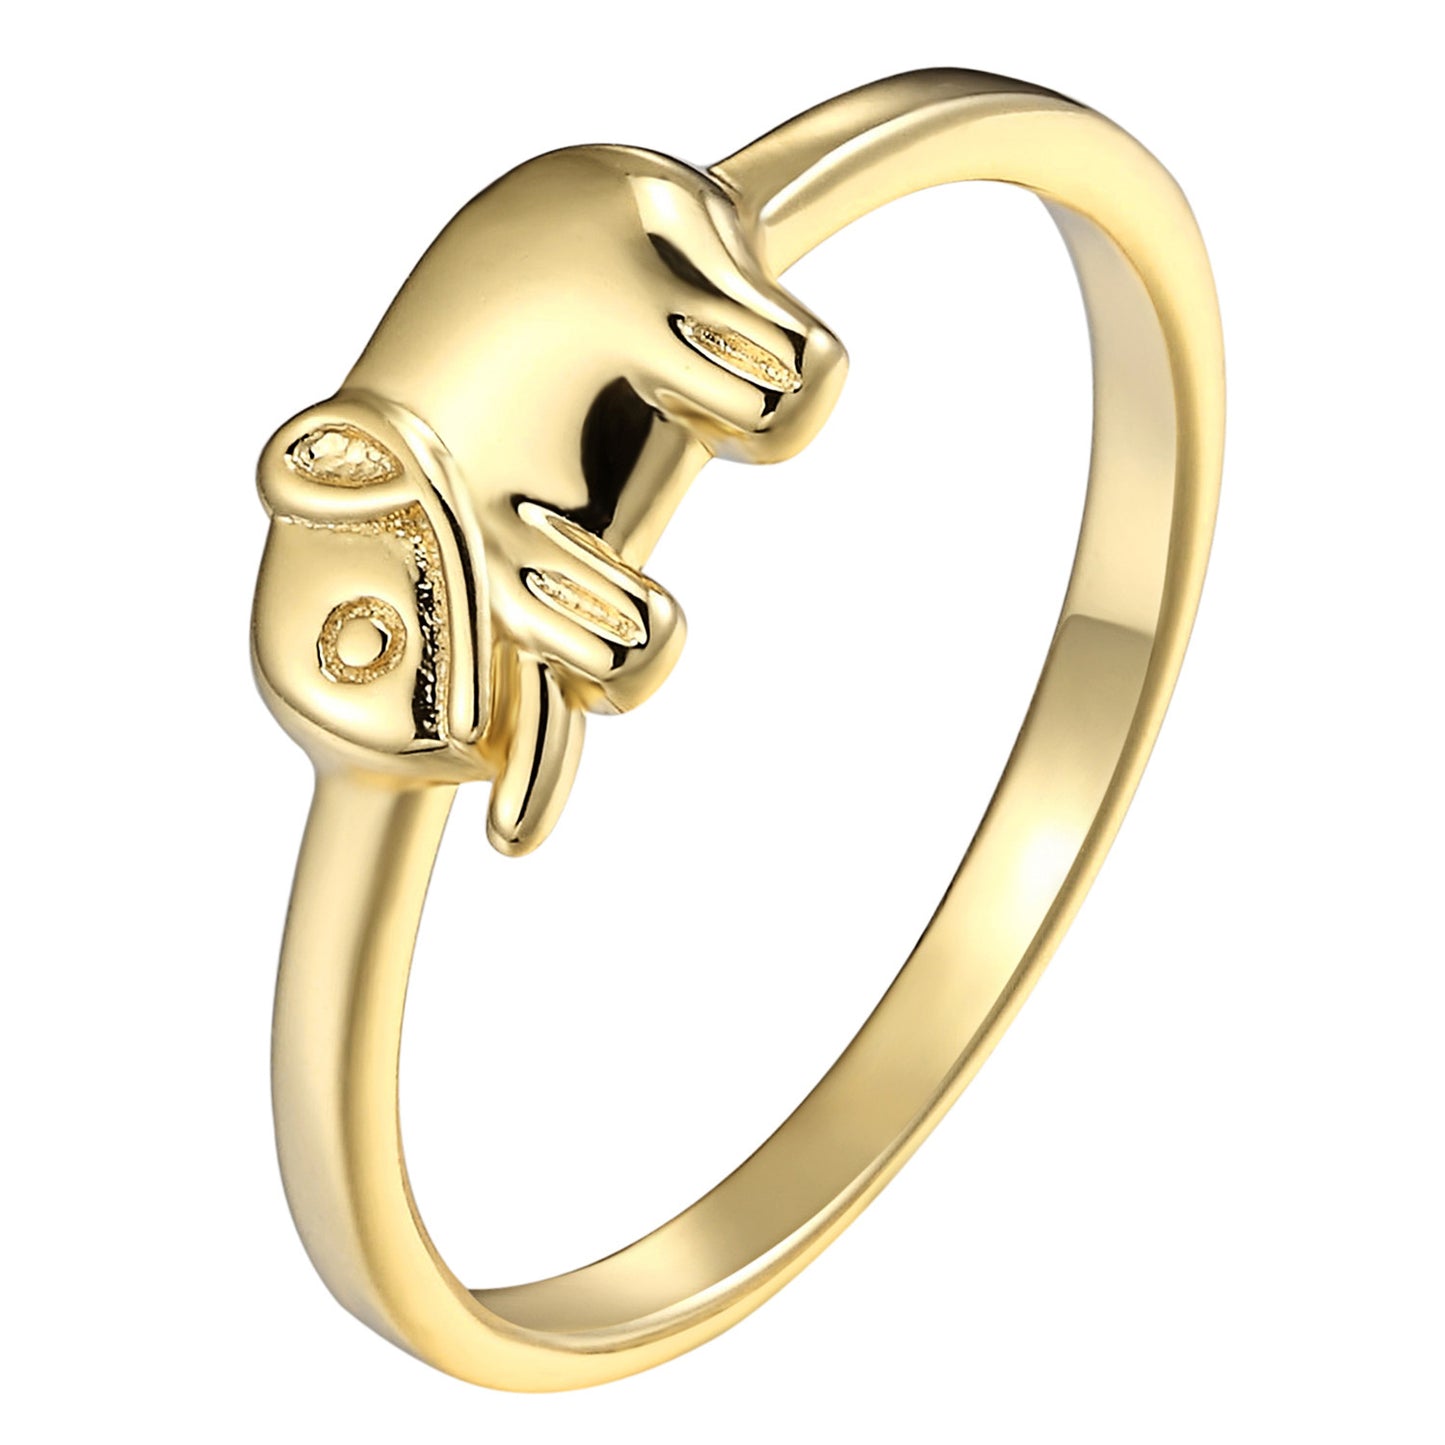 Womens 925 Sterling Silver Vintage Style Luck Elephant Design Ring 14k Gold Tone